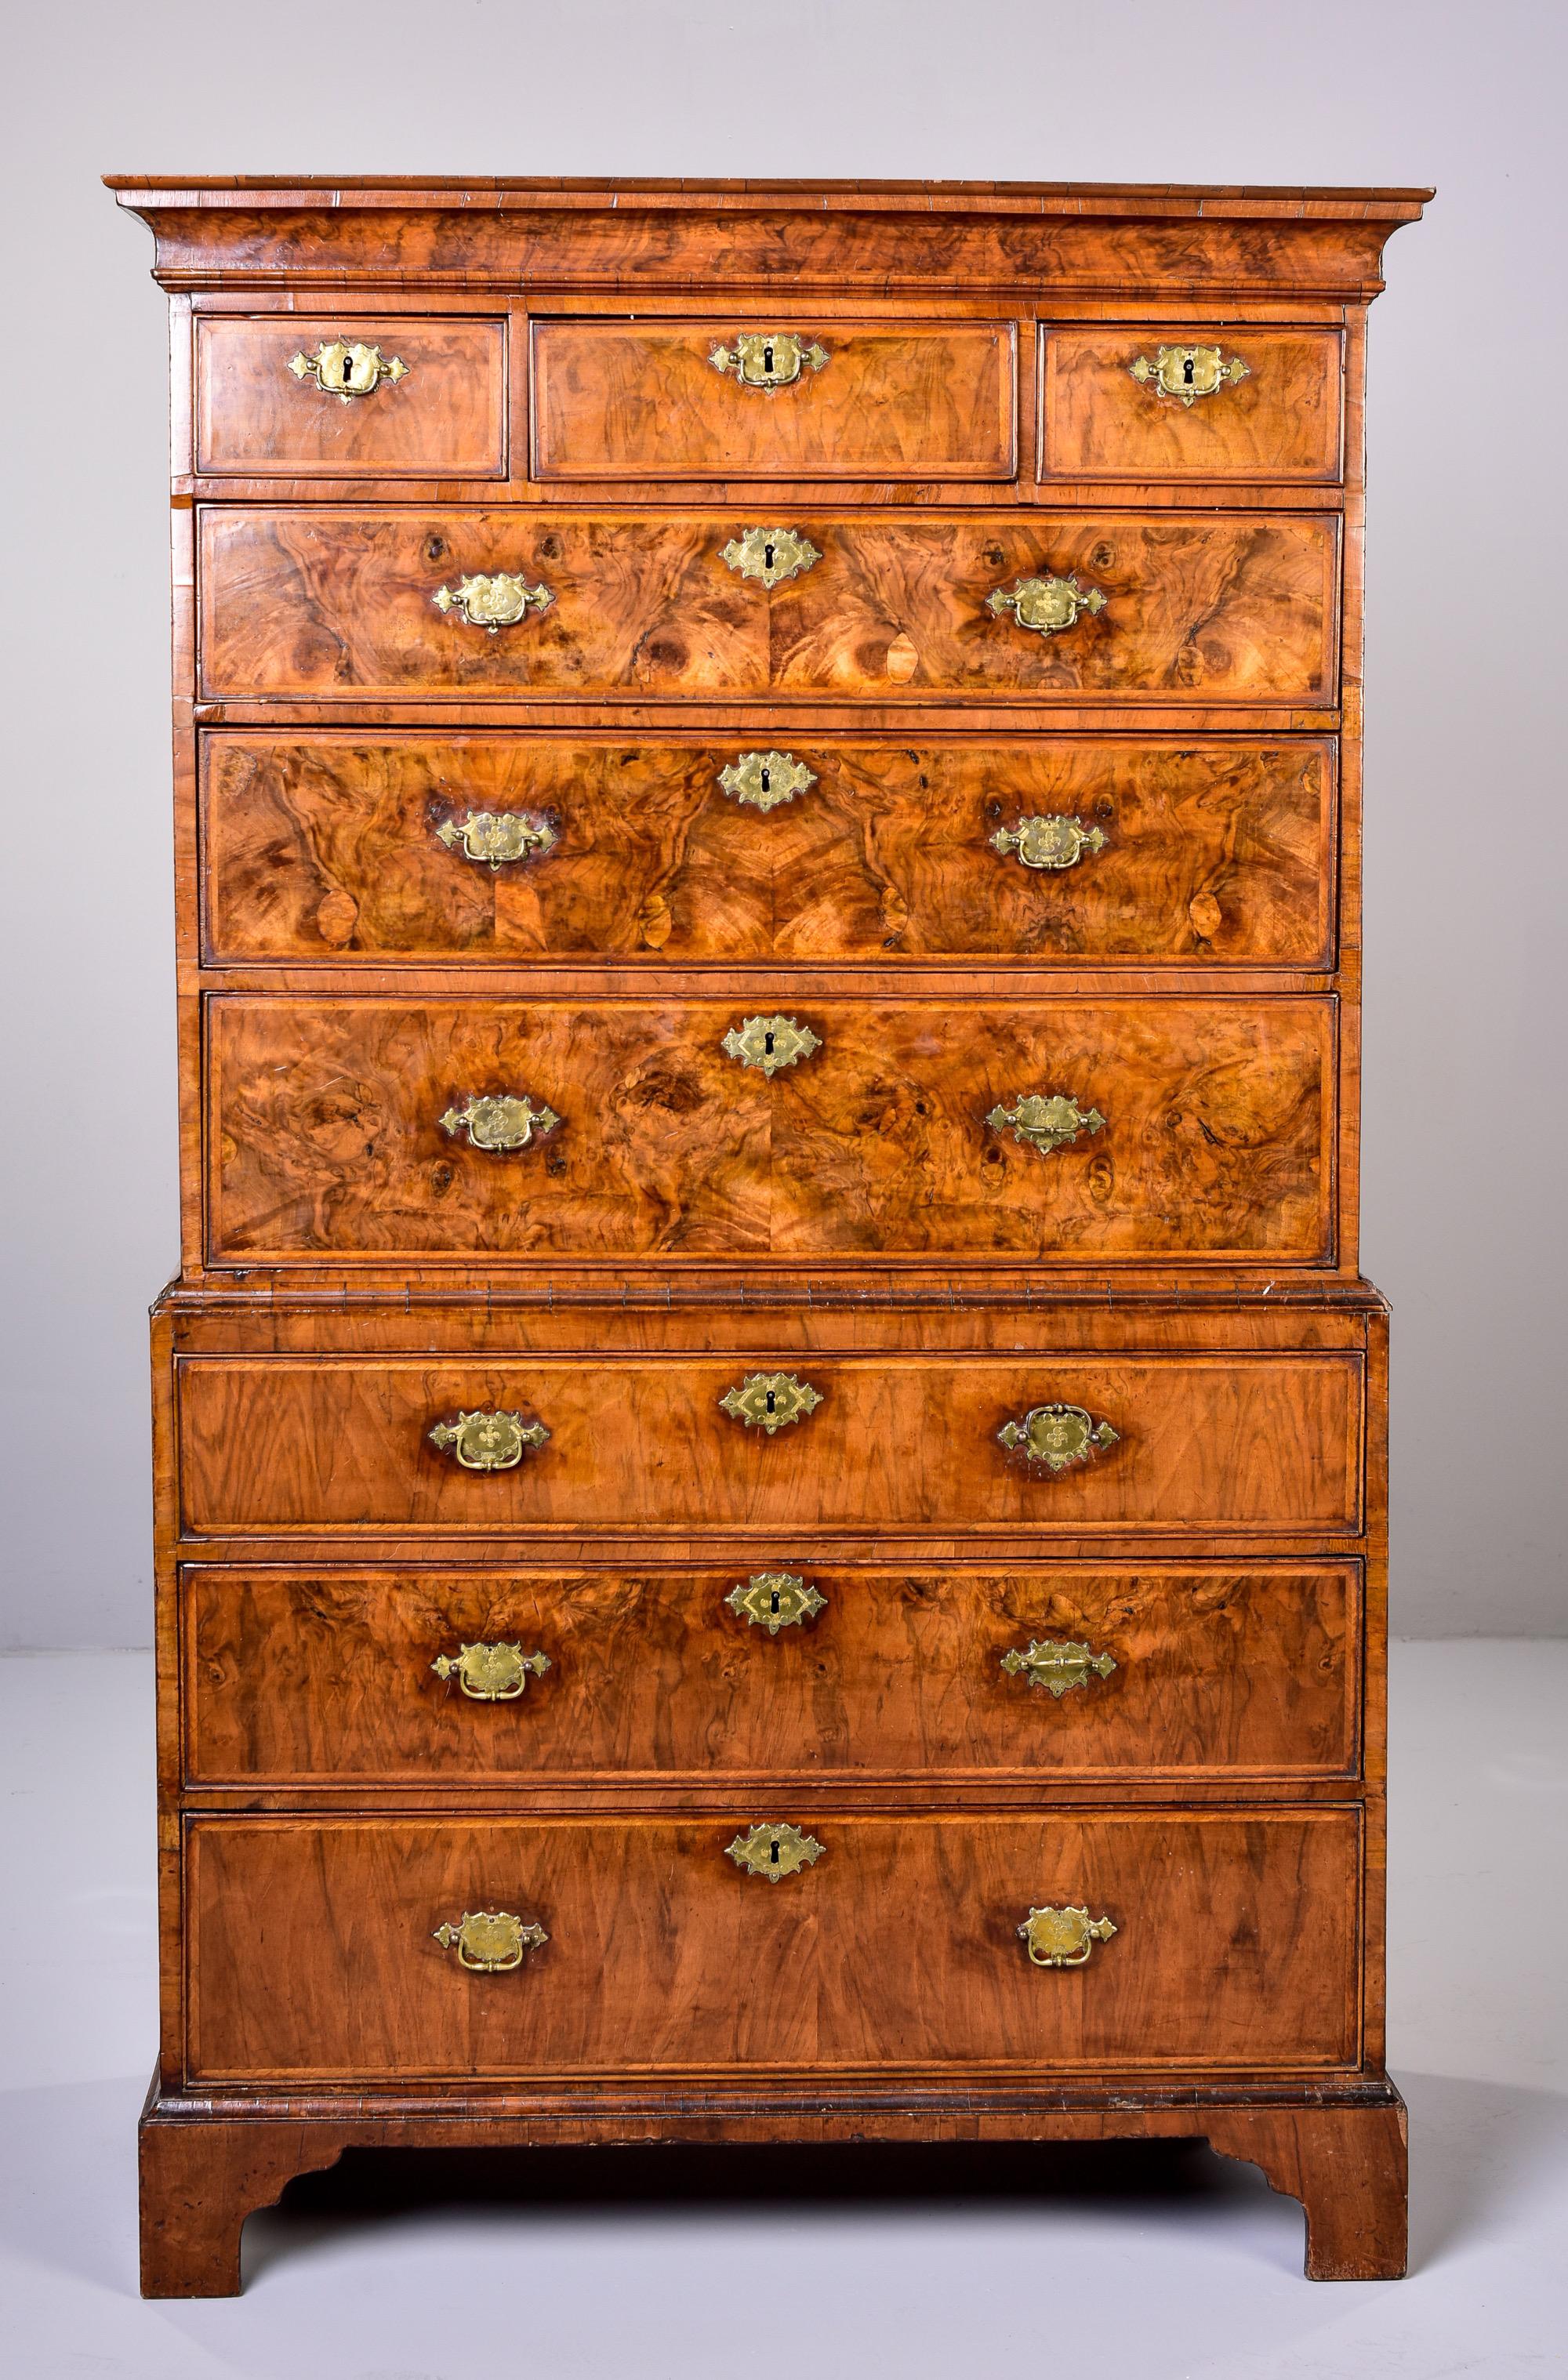 Circa 1780s George III chest on chest in burl walnut with original brass hardware. Tall, handsome chest shows authentic age and stands nearly seven feet high. Some cracks to veneer on sides and drawer bottoms - see detail photos. Some scattered